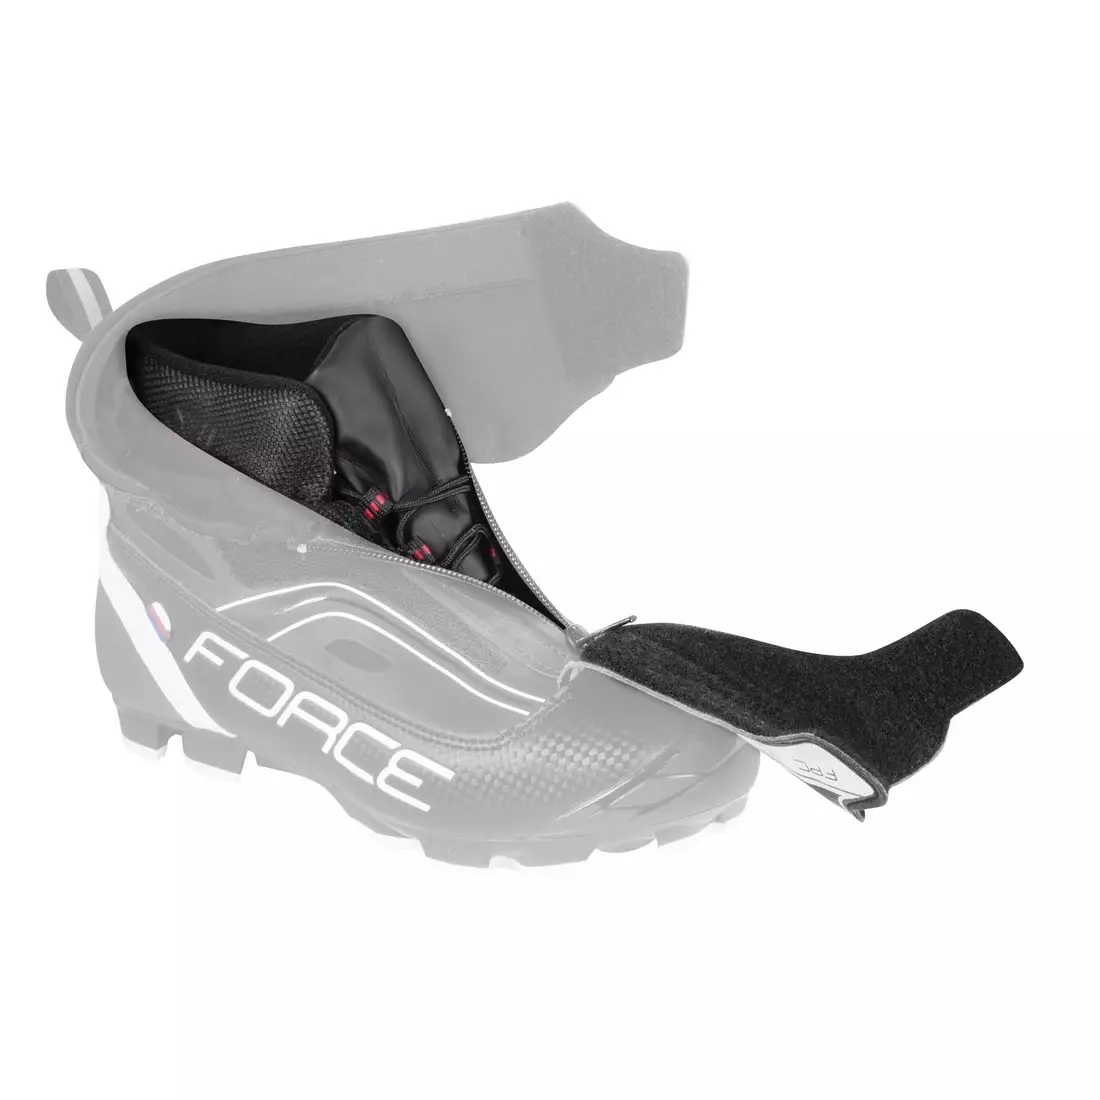 FORCE ICE MTB 94041 winter cycling shoes, black-fluorine